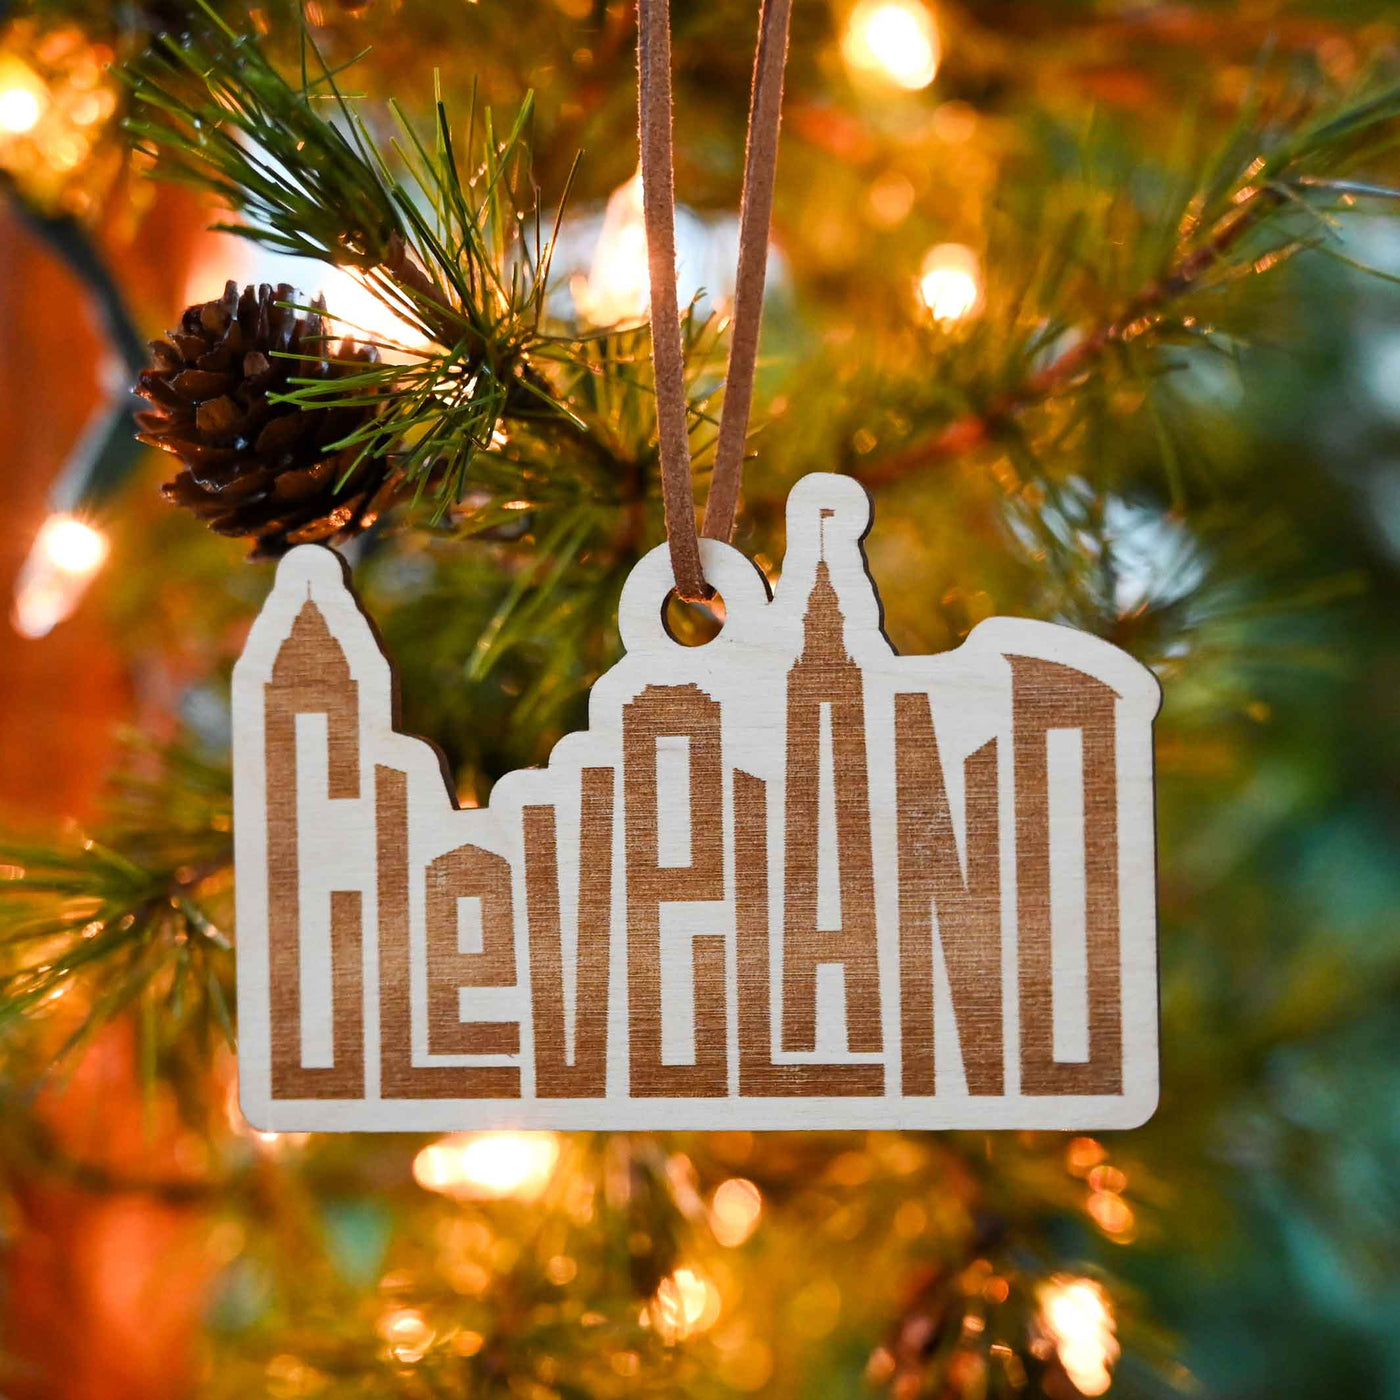 Cleveland Skyline Letters Wood Ornament